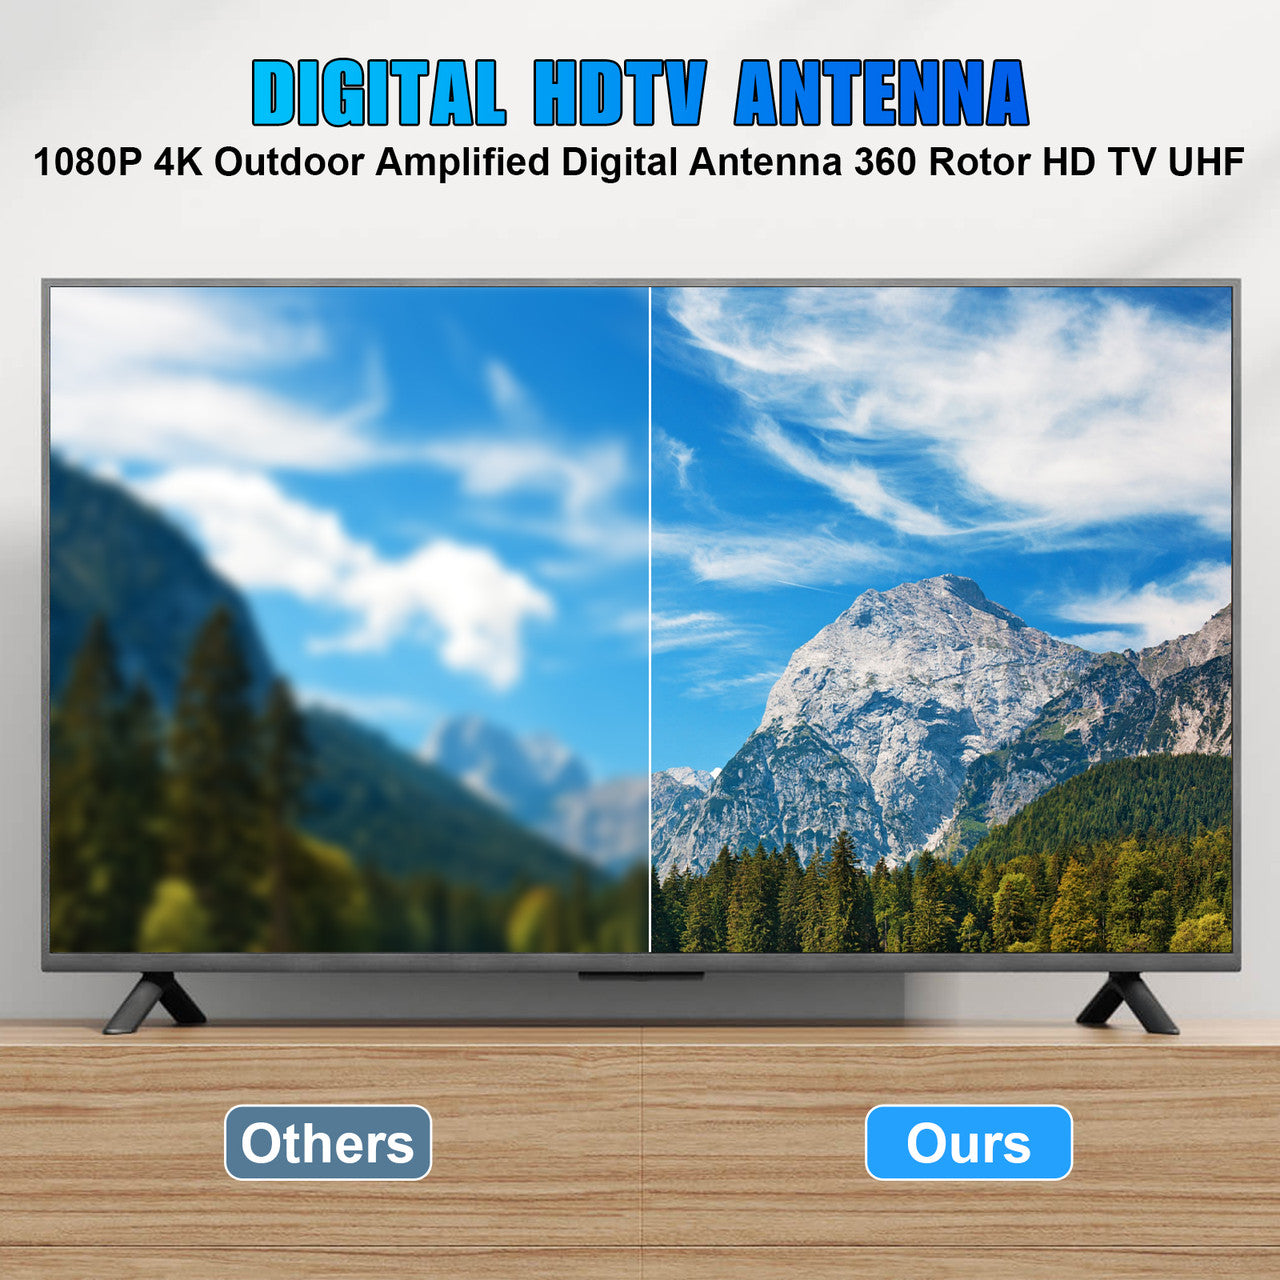 1080P 4K Outdoor Amplified Digital Antenna 360 Rotor HD TV VHF with a Lightweight and Compact Desgin